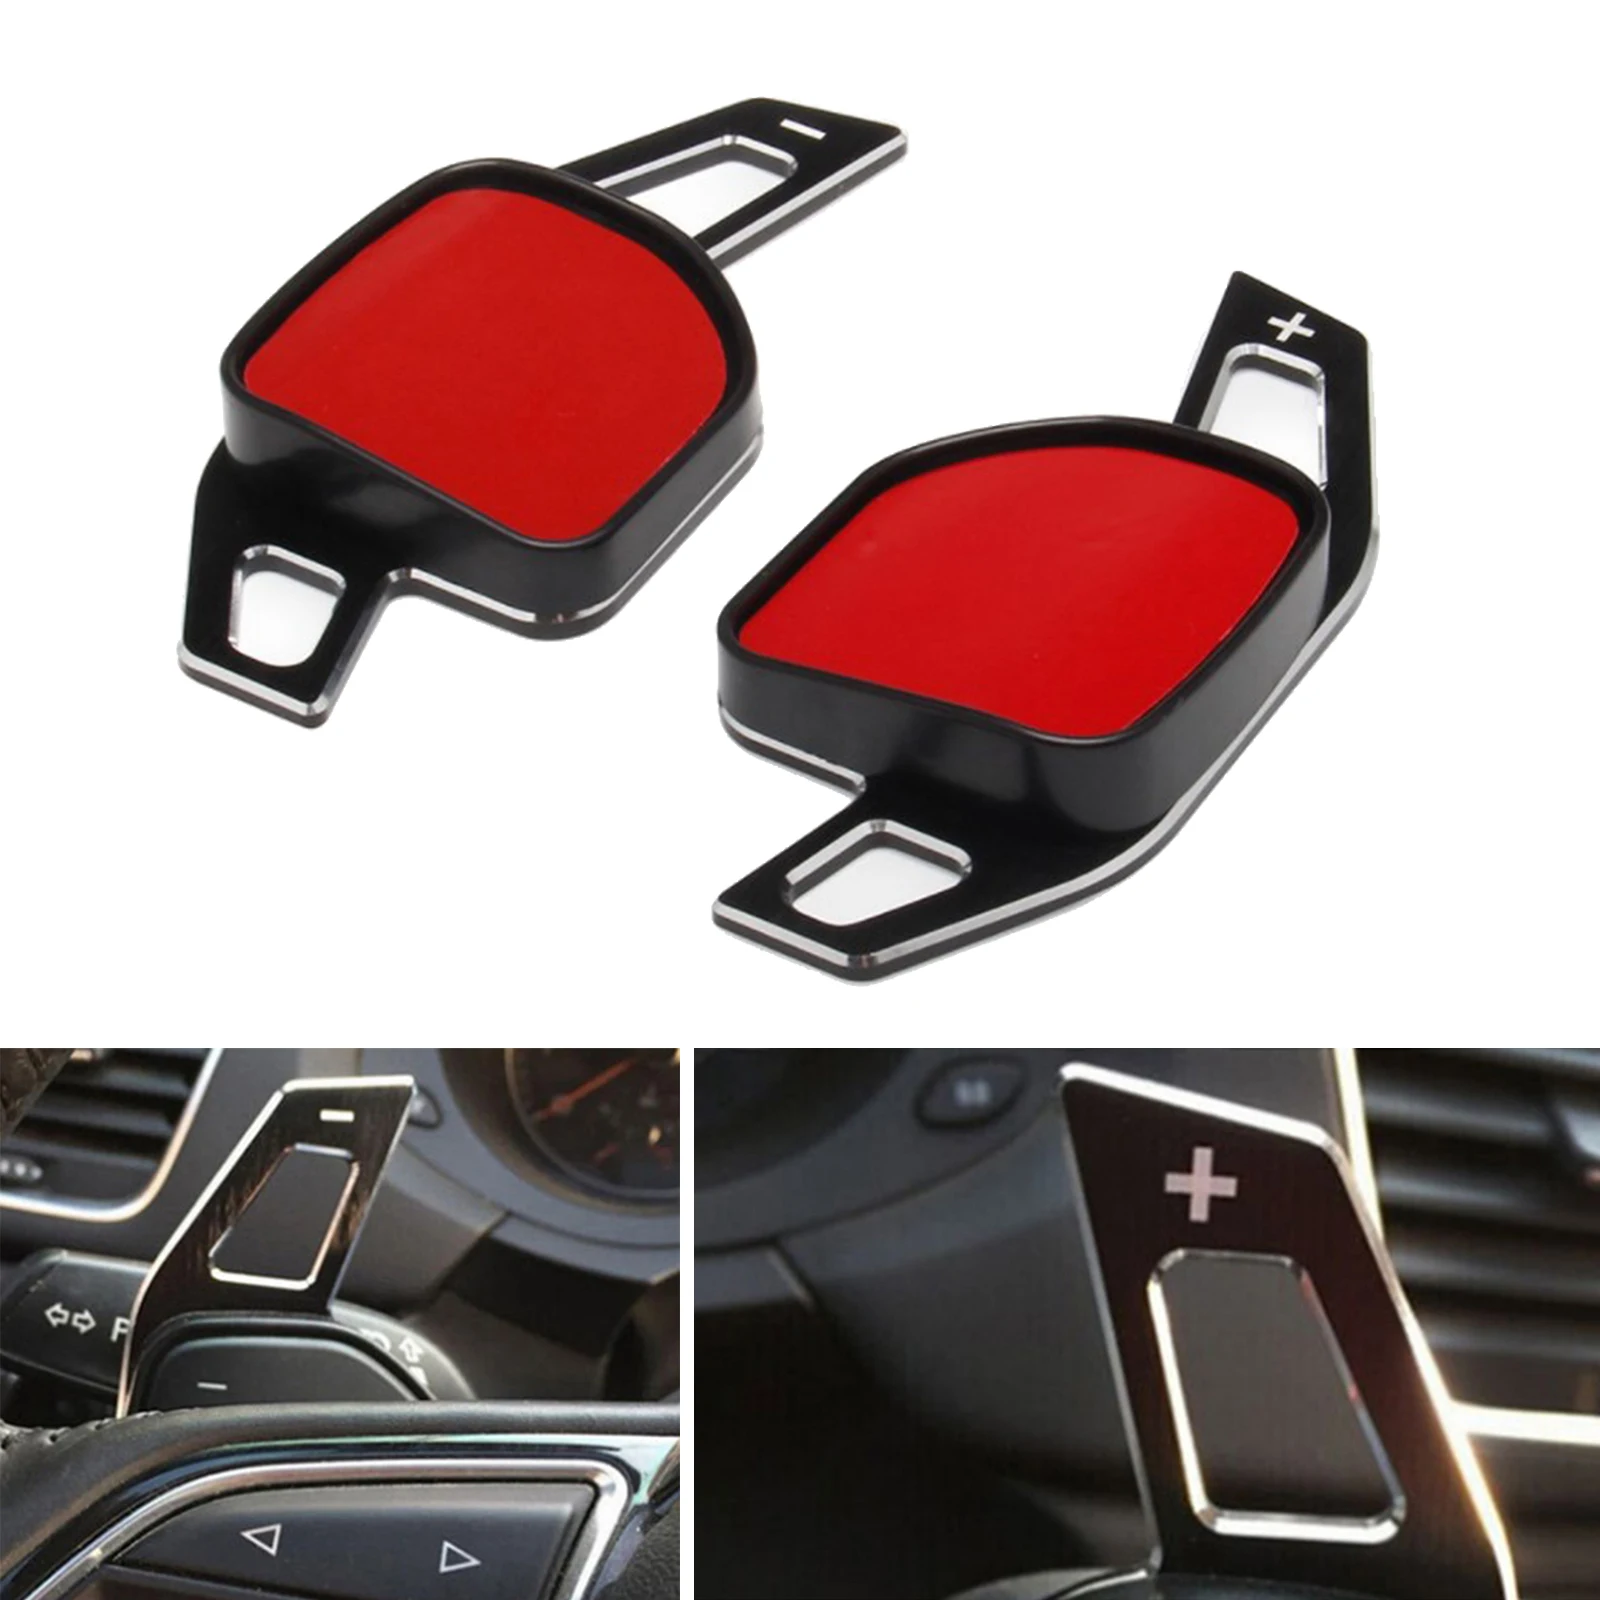 Pair Steering Wheel Shifter Paddle Shift Extension Fit for Audi A3(2013-2016), A4L(2013-2016), A5(2012-2016), A6L(2012-2018)